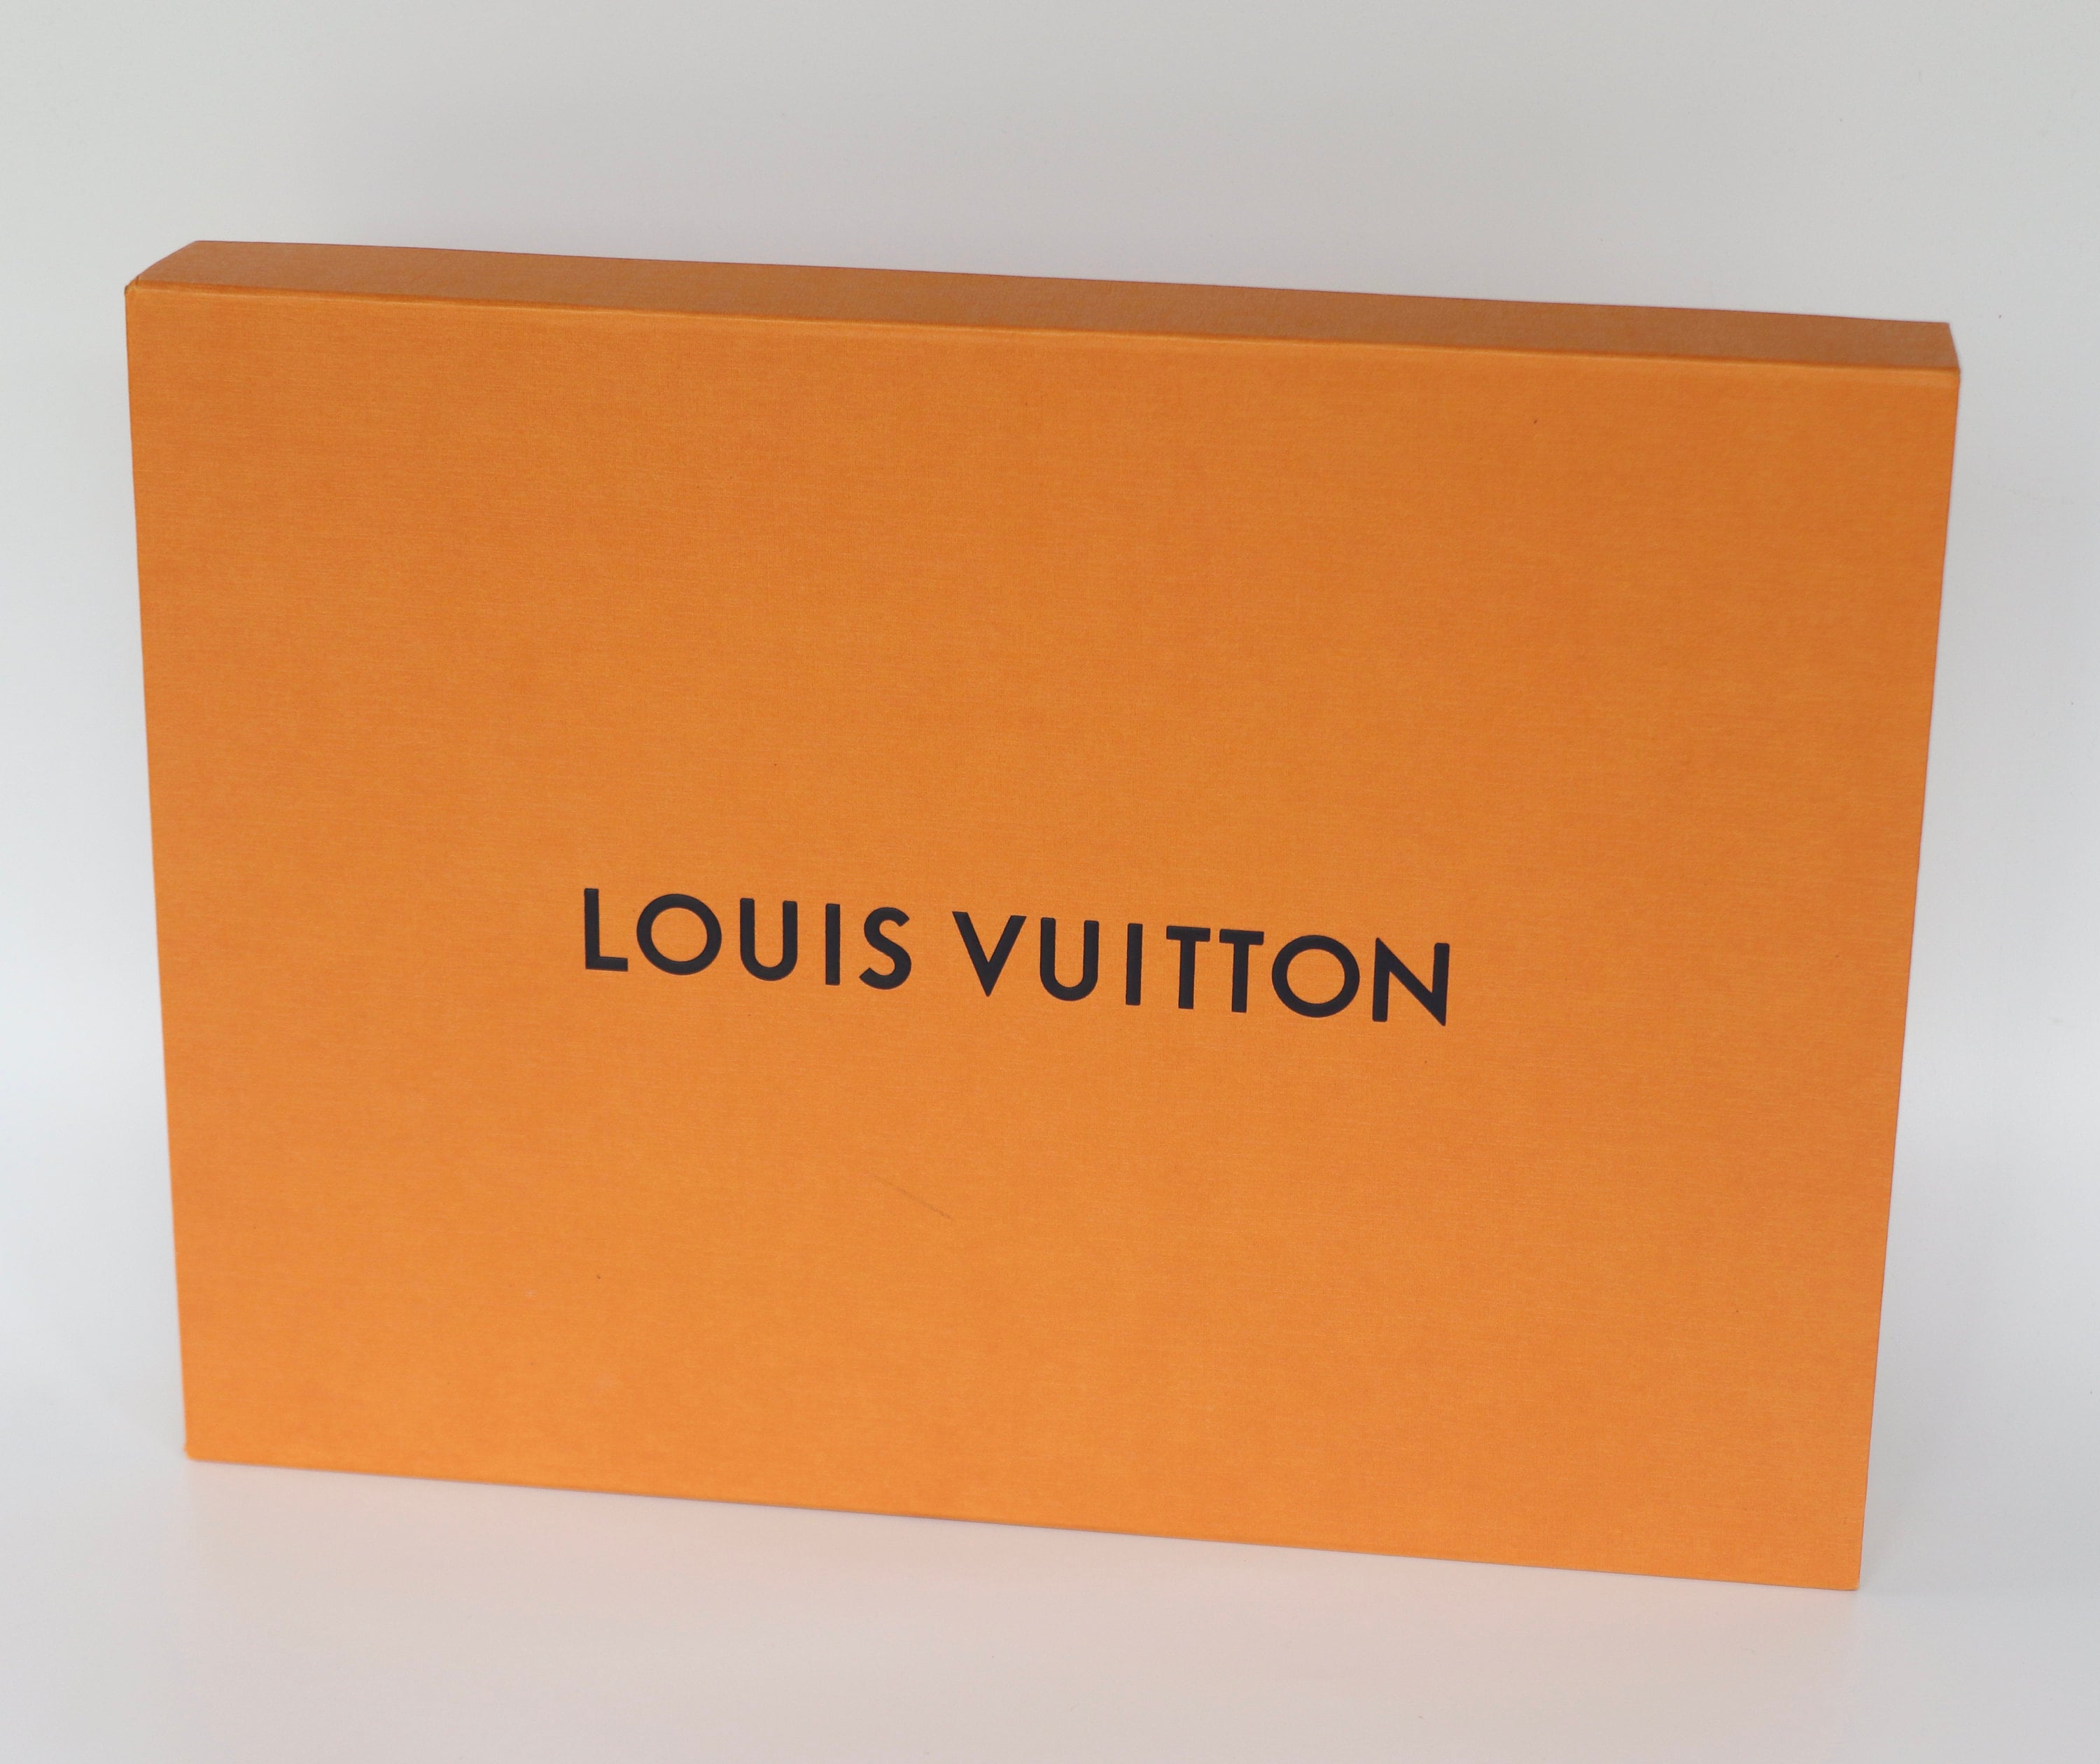 New Authentic Louis Vuitton Lv Orange Gift Bag And Magnetic Empty